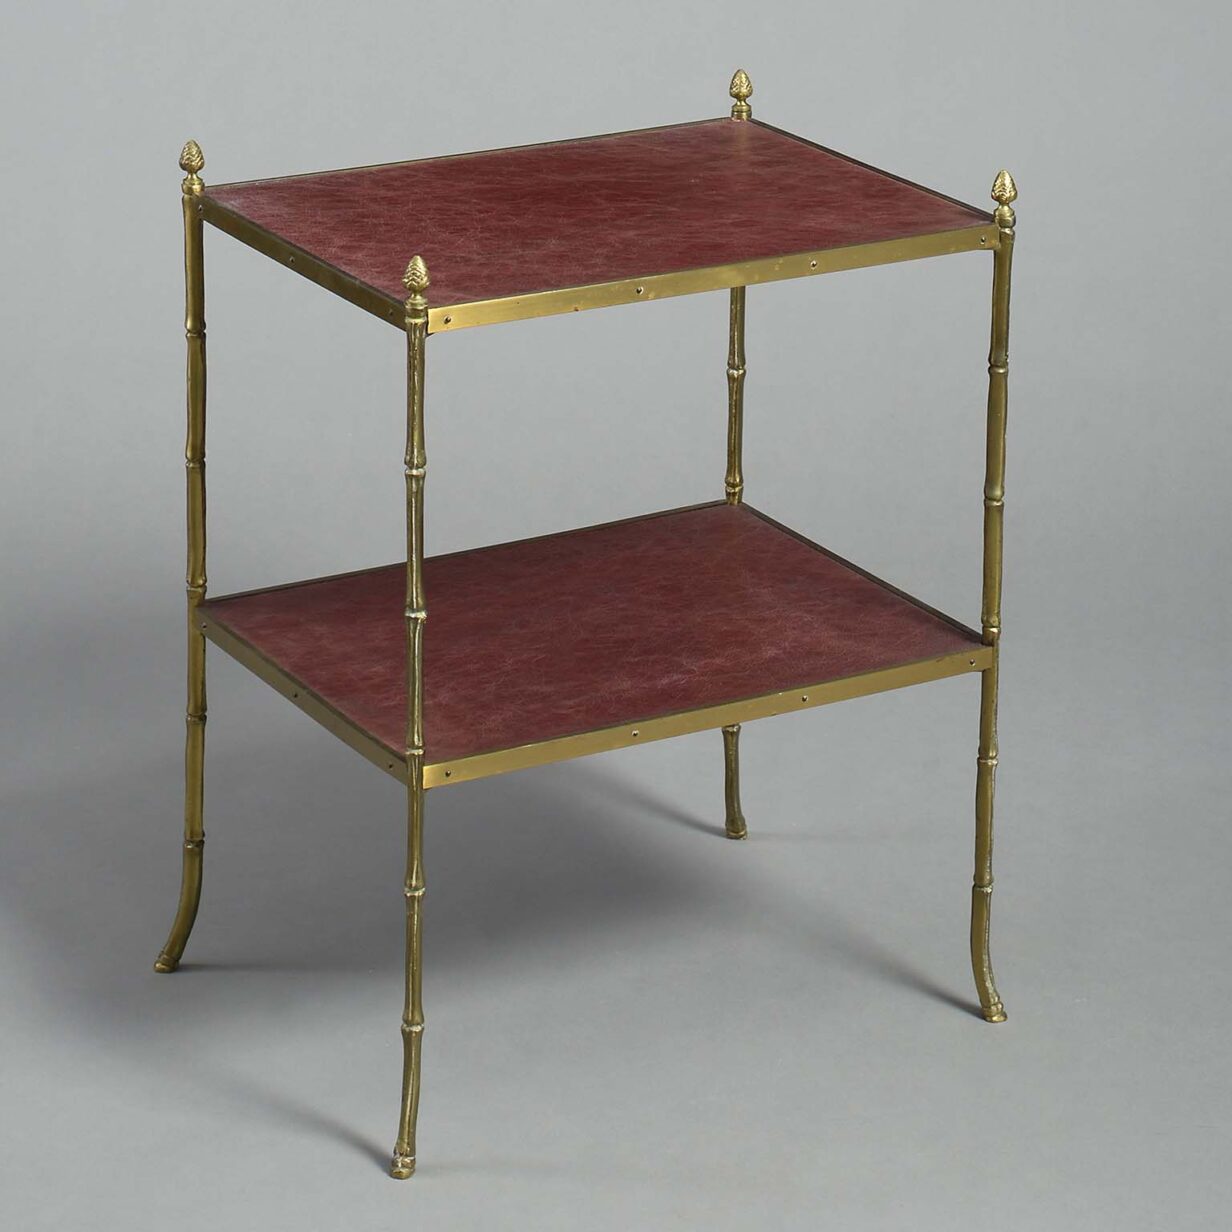 Pair of two tier brass and leathered end tables